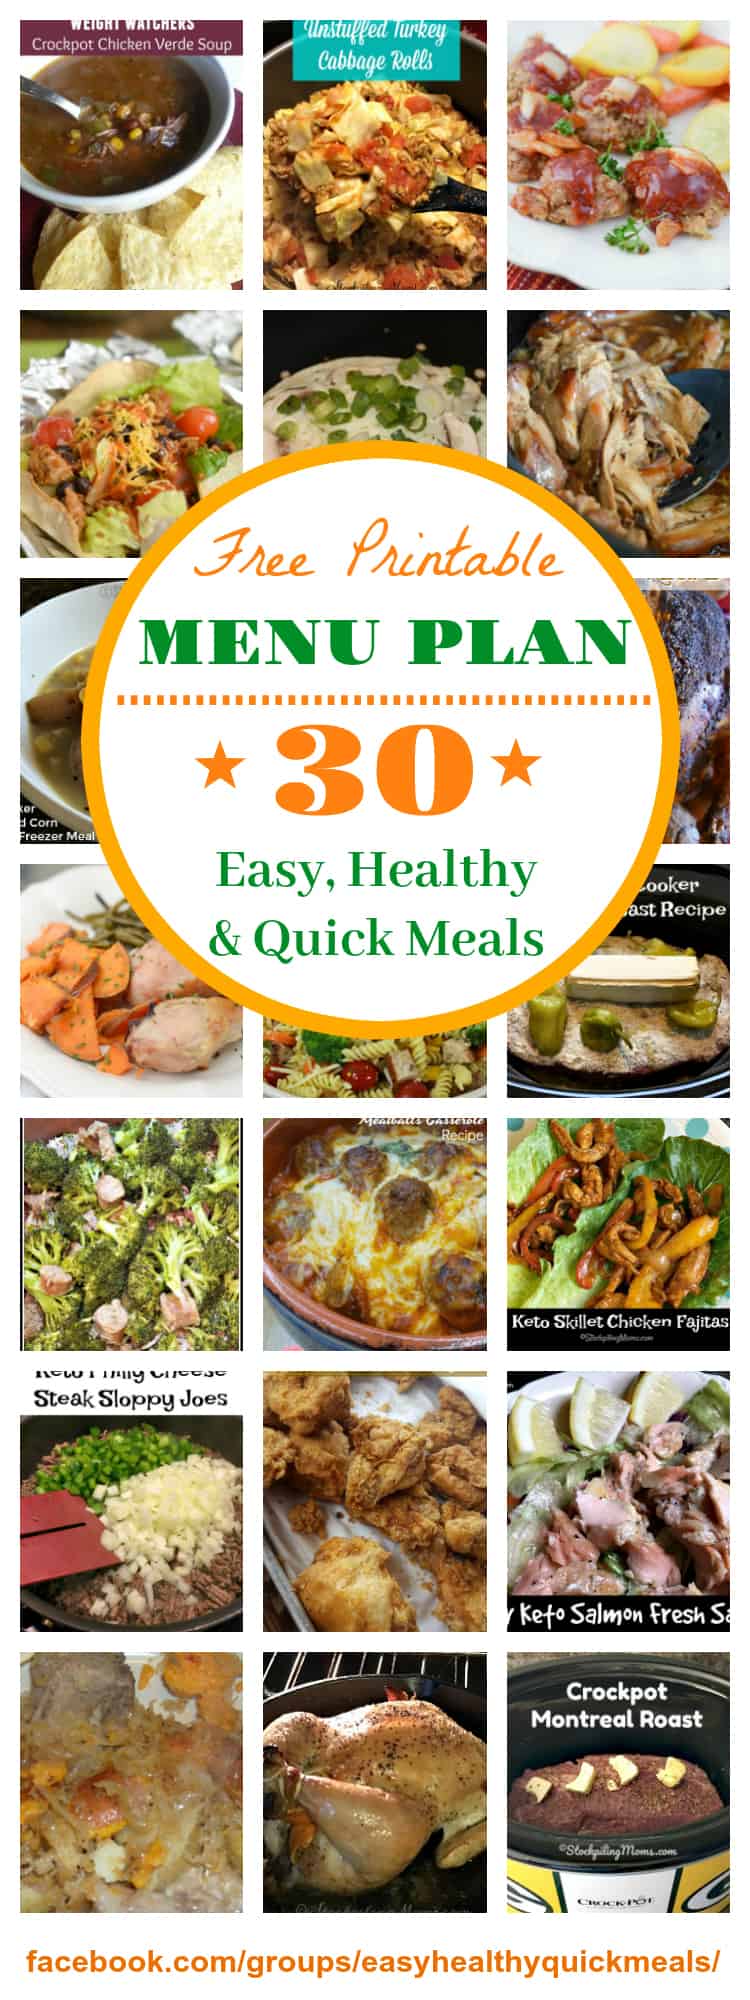 November Menu Plan with 30 healthy dinner recipes that are quick and easy to make.